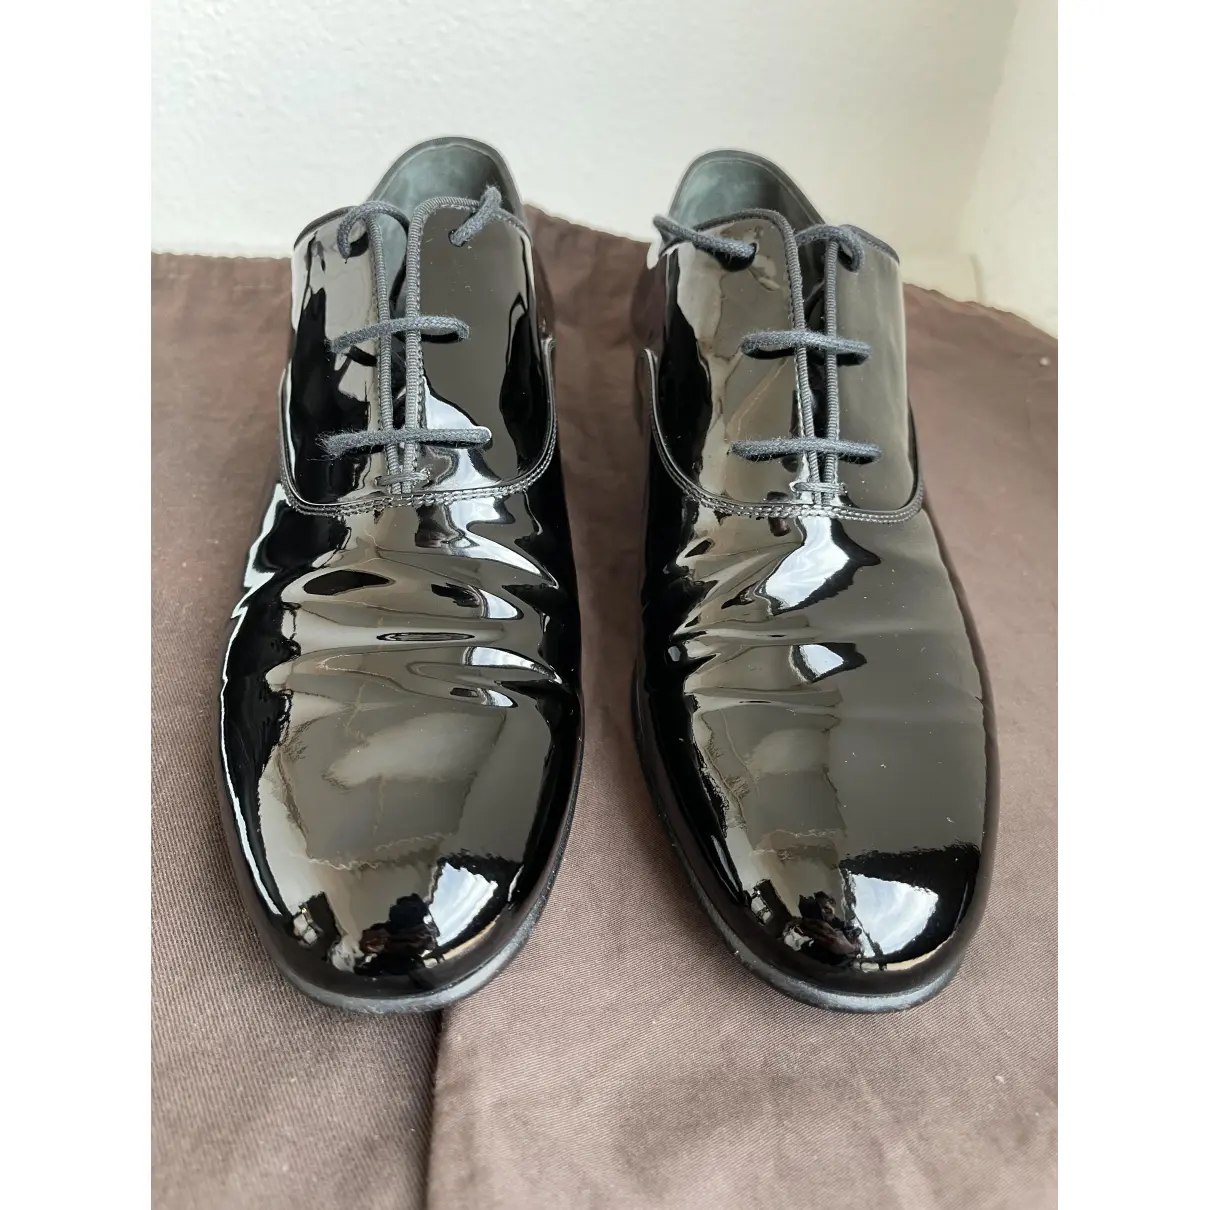 Patent leather lace ups Gucci